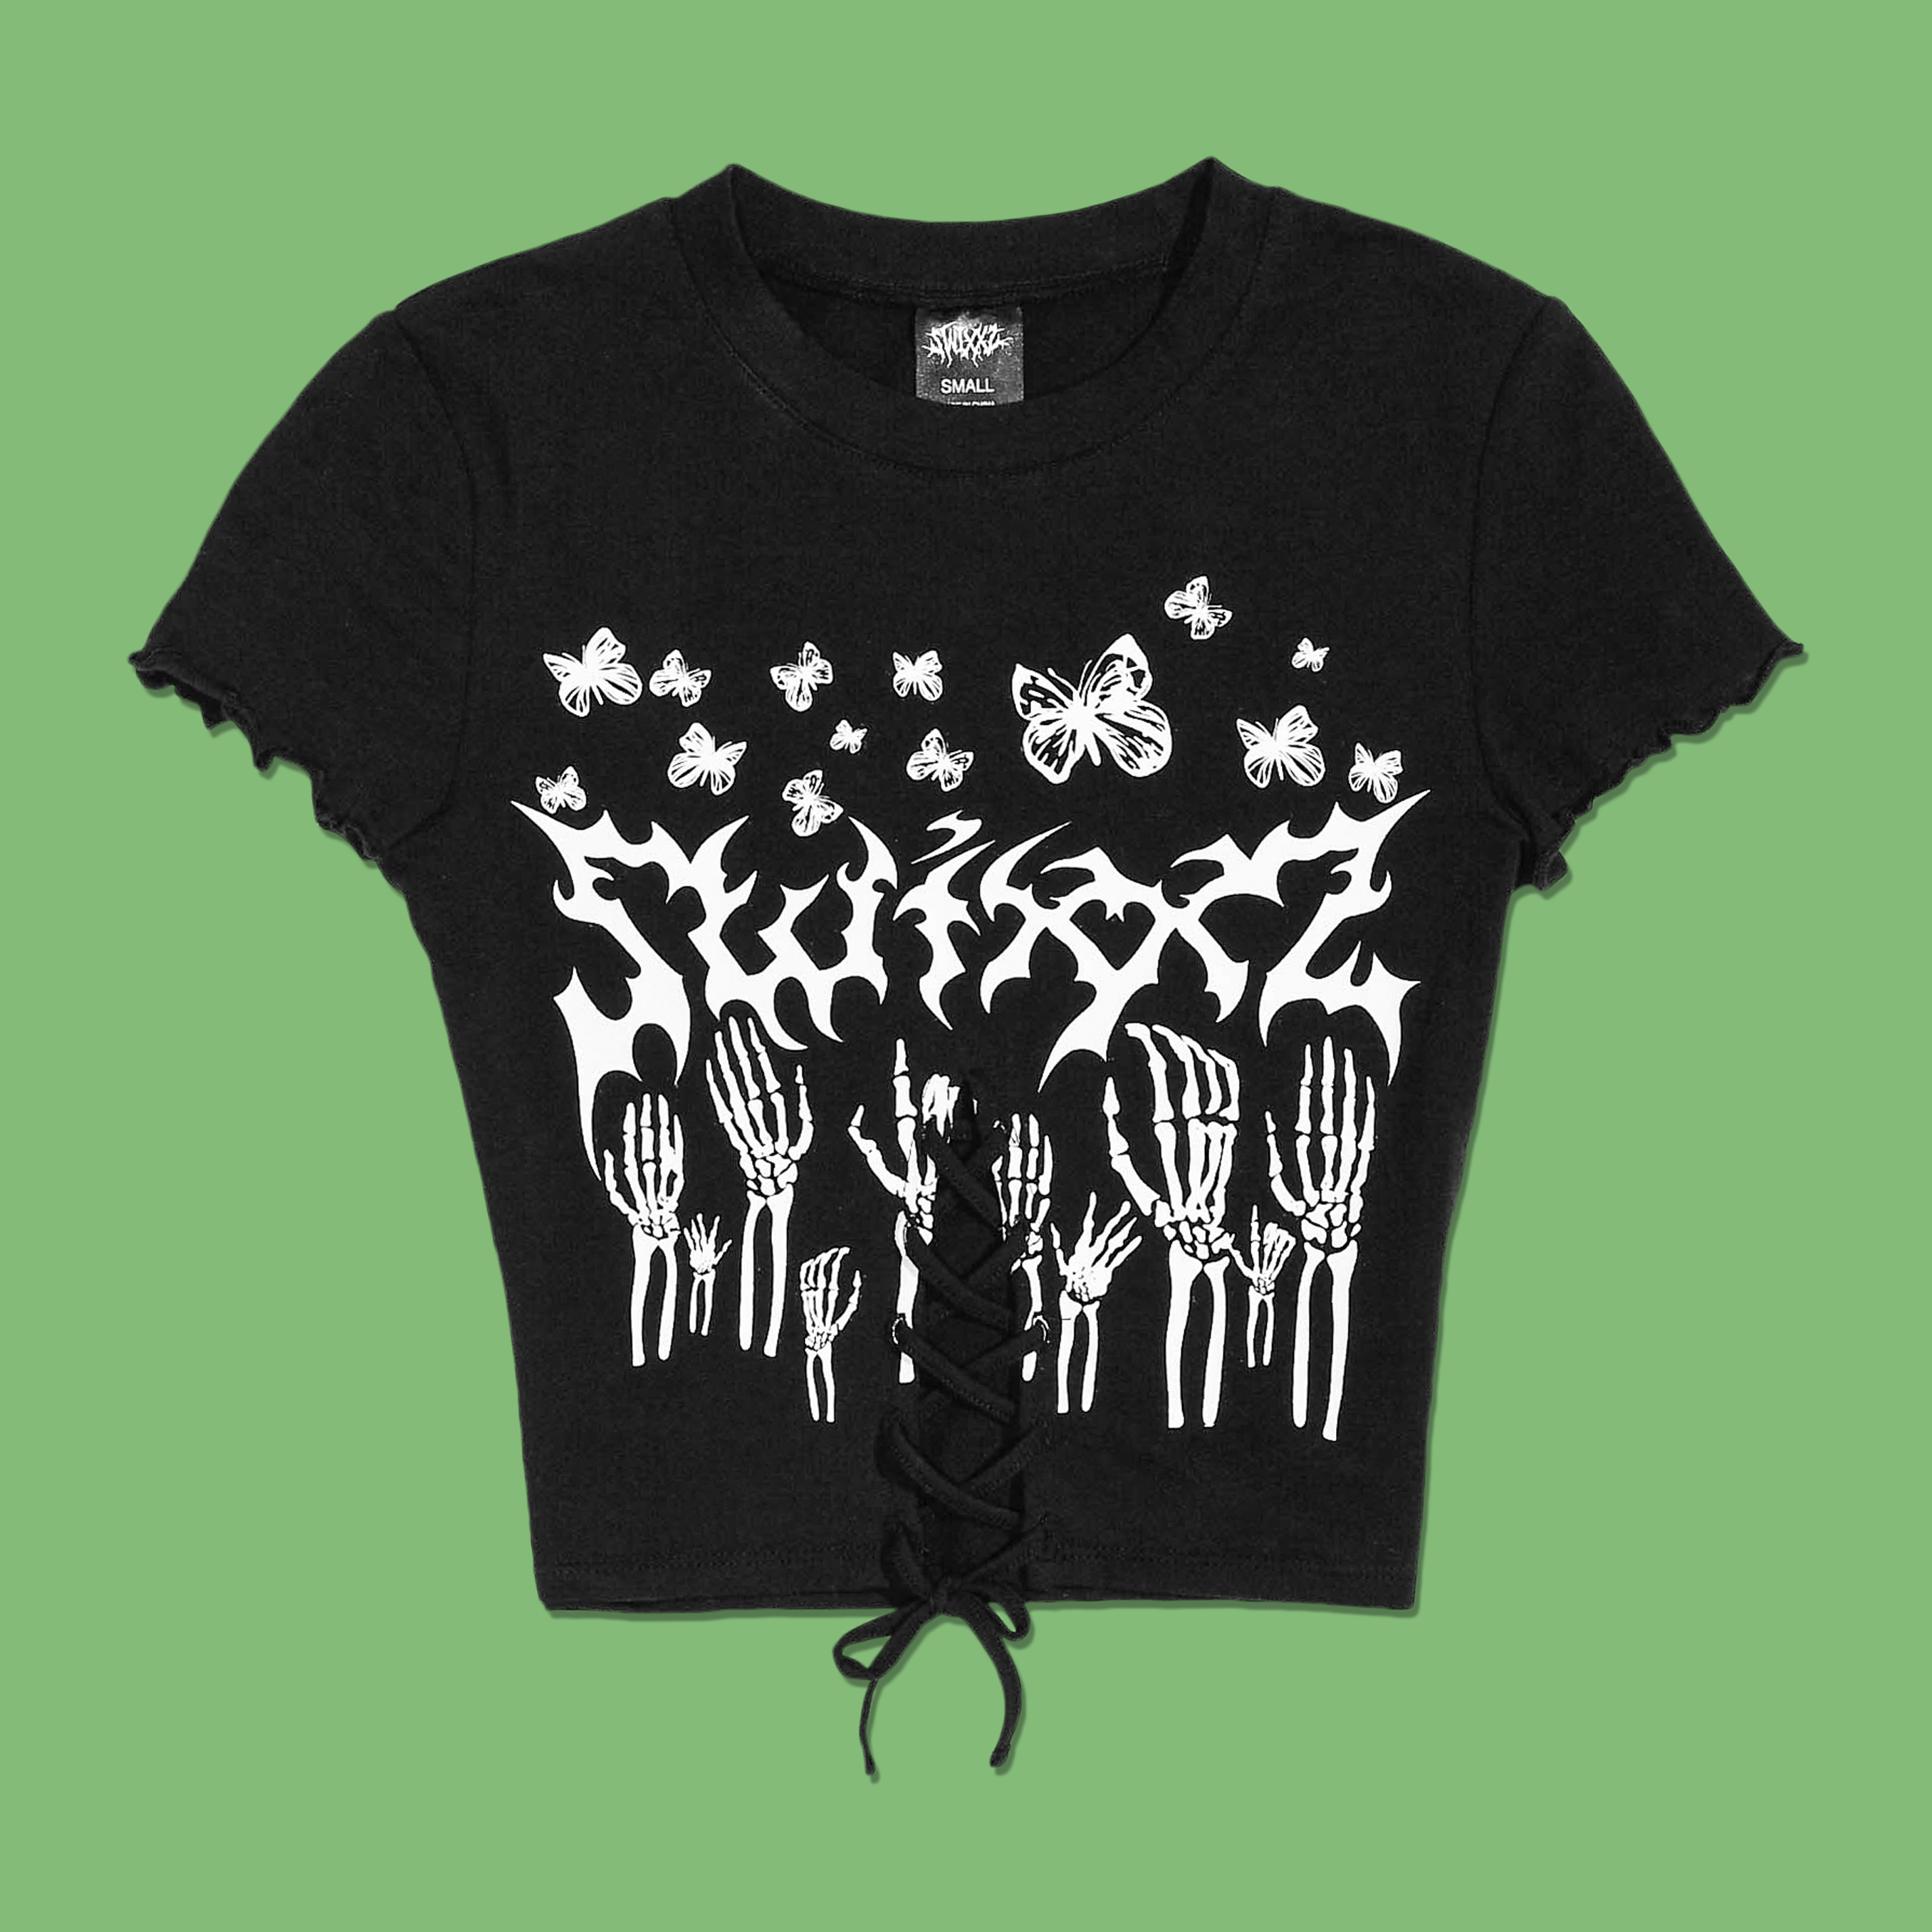 Stage Dive Lace Up Top from SWIXXZ by Maggie Lindemann